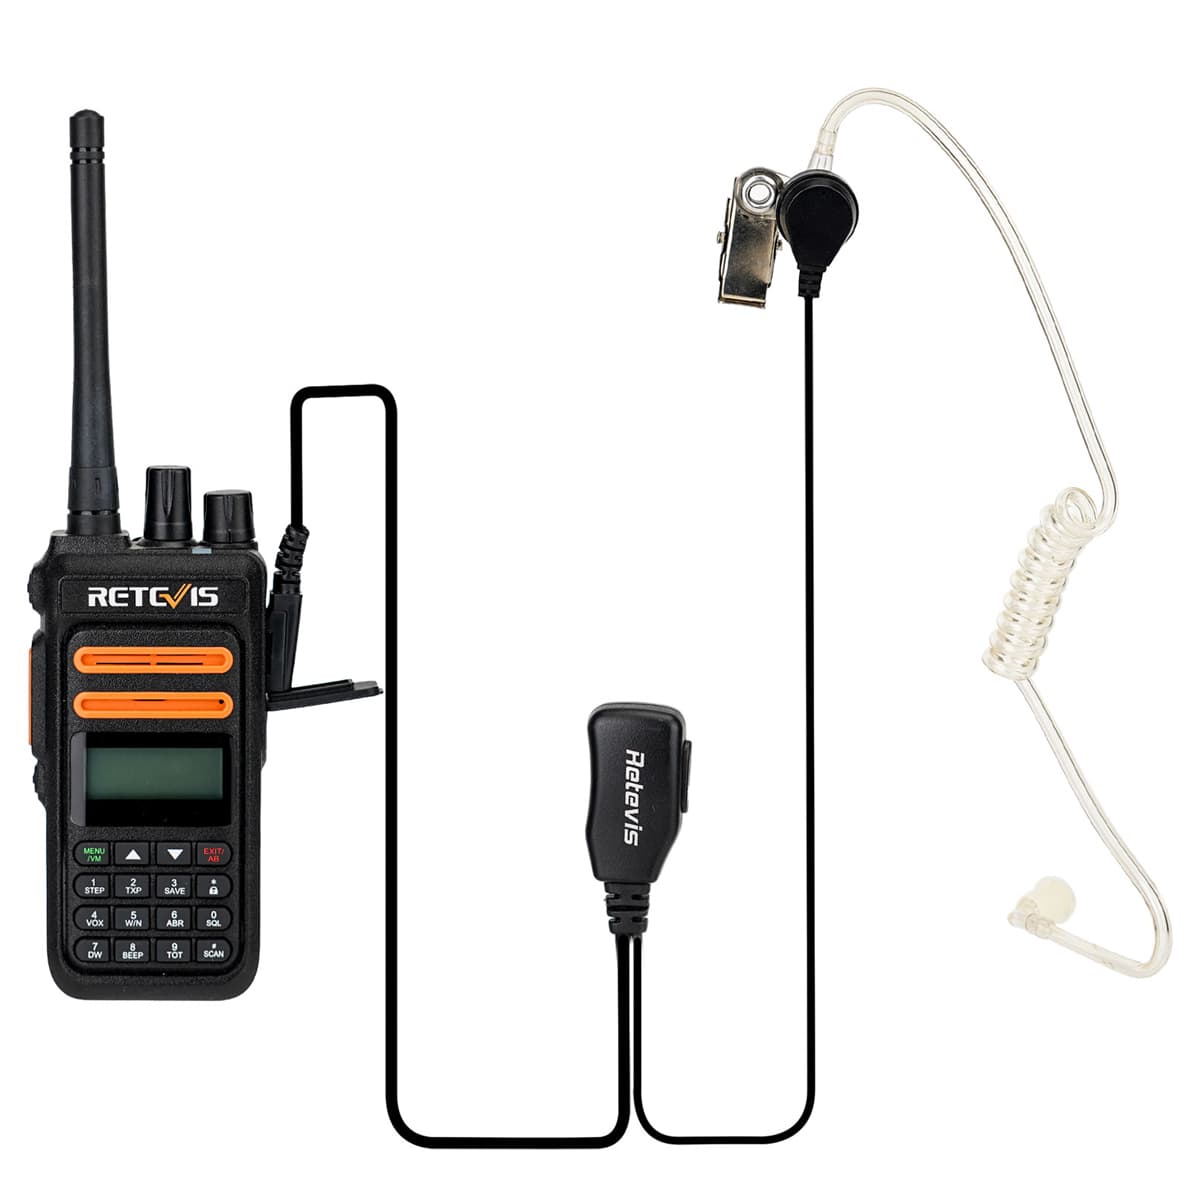 retevis rt76p gmrs radio with earpiece